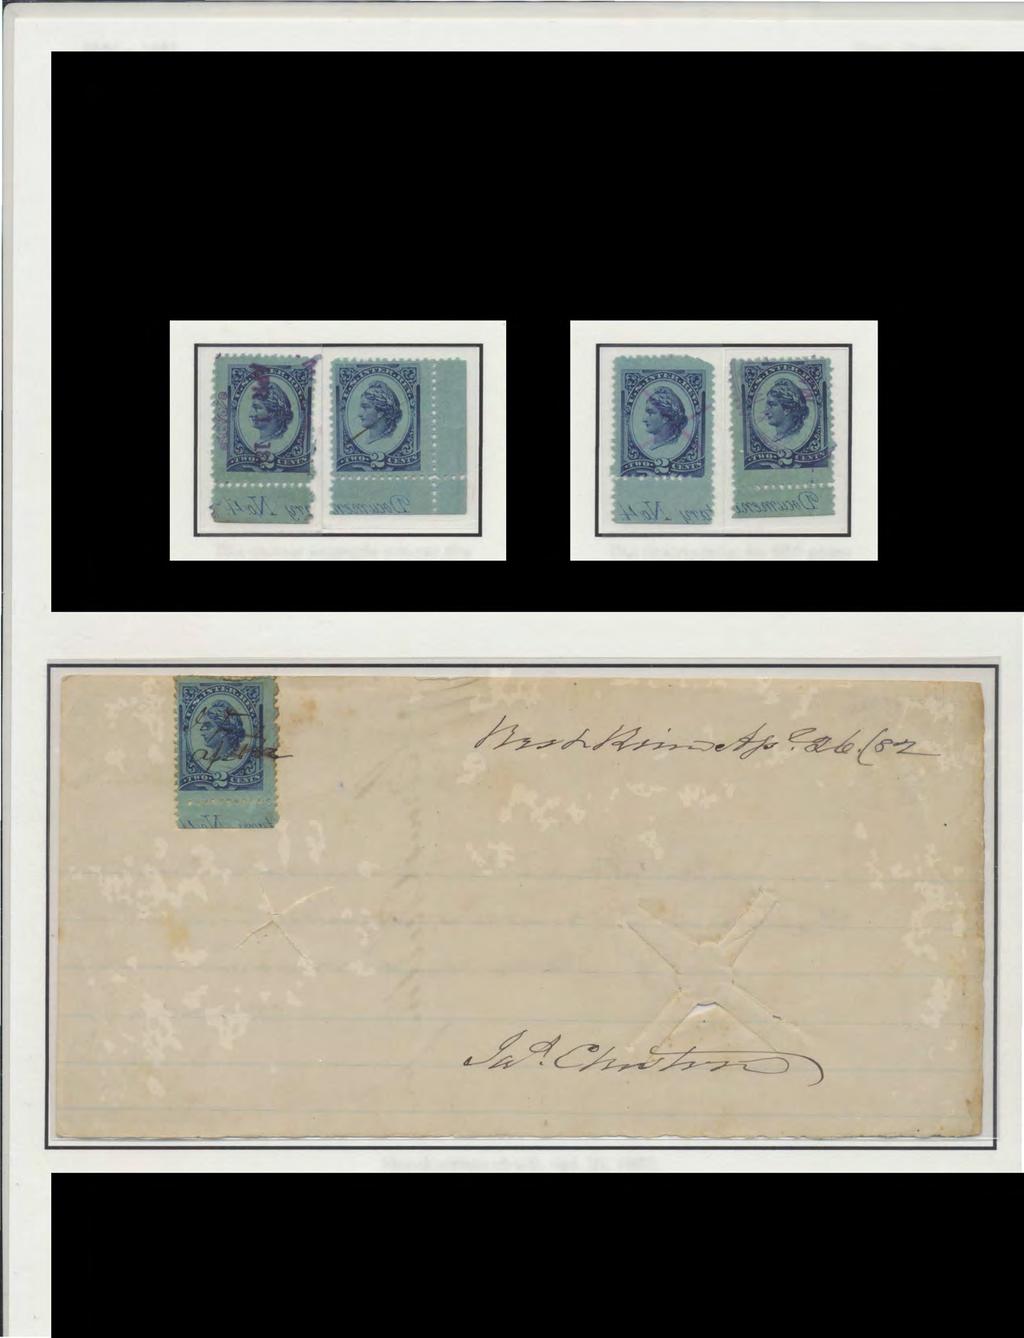 The corner example proves the position of the inscribed "Documentary No 4".